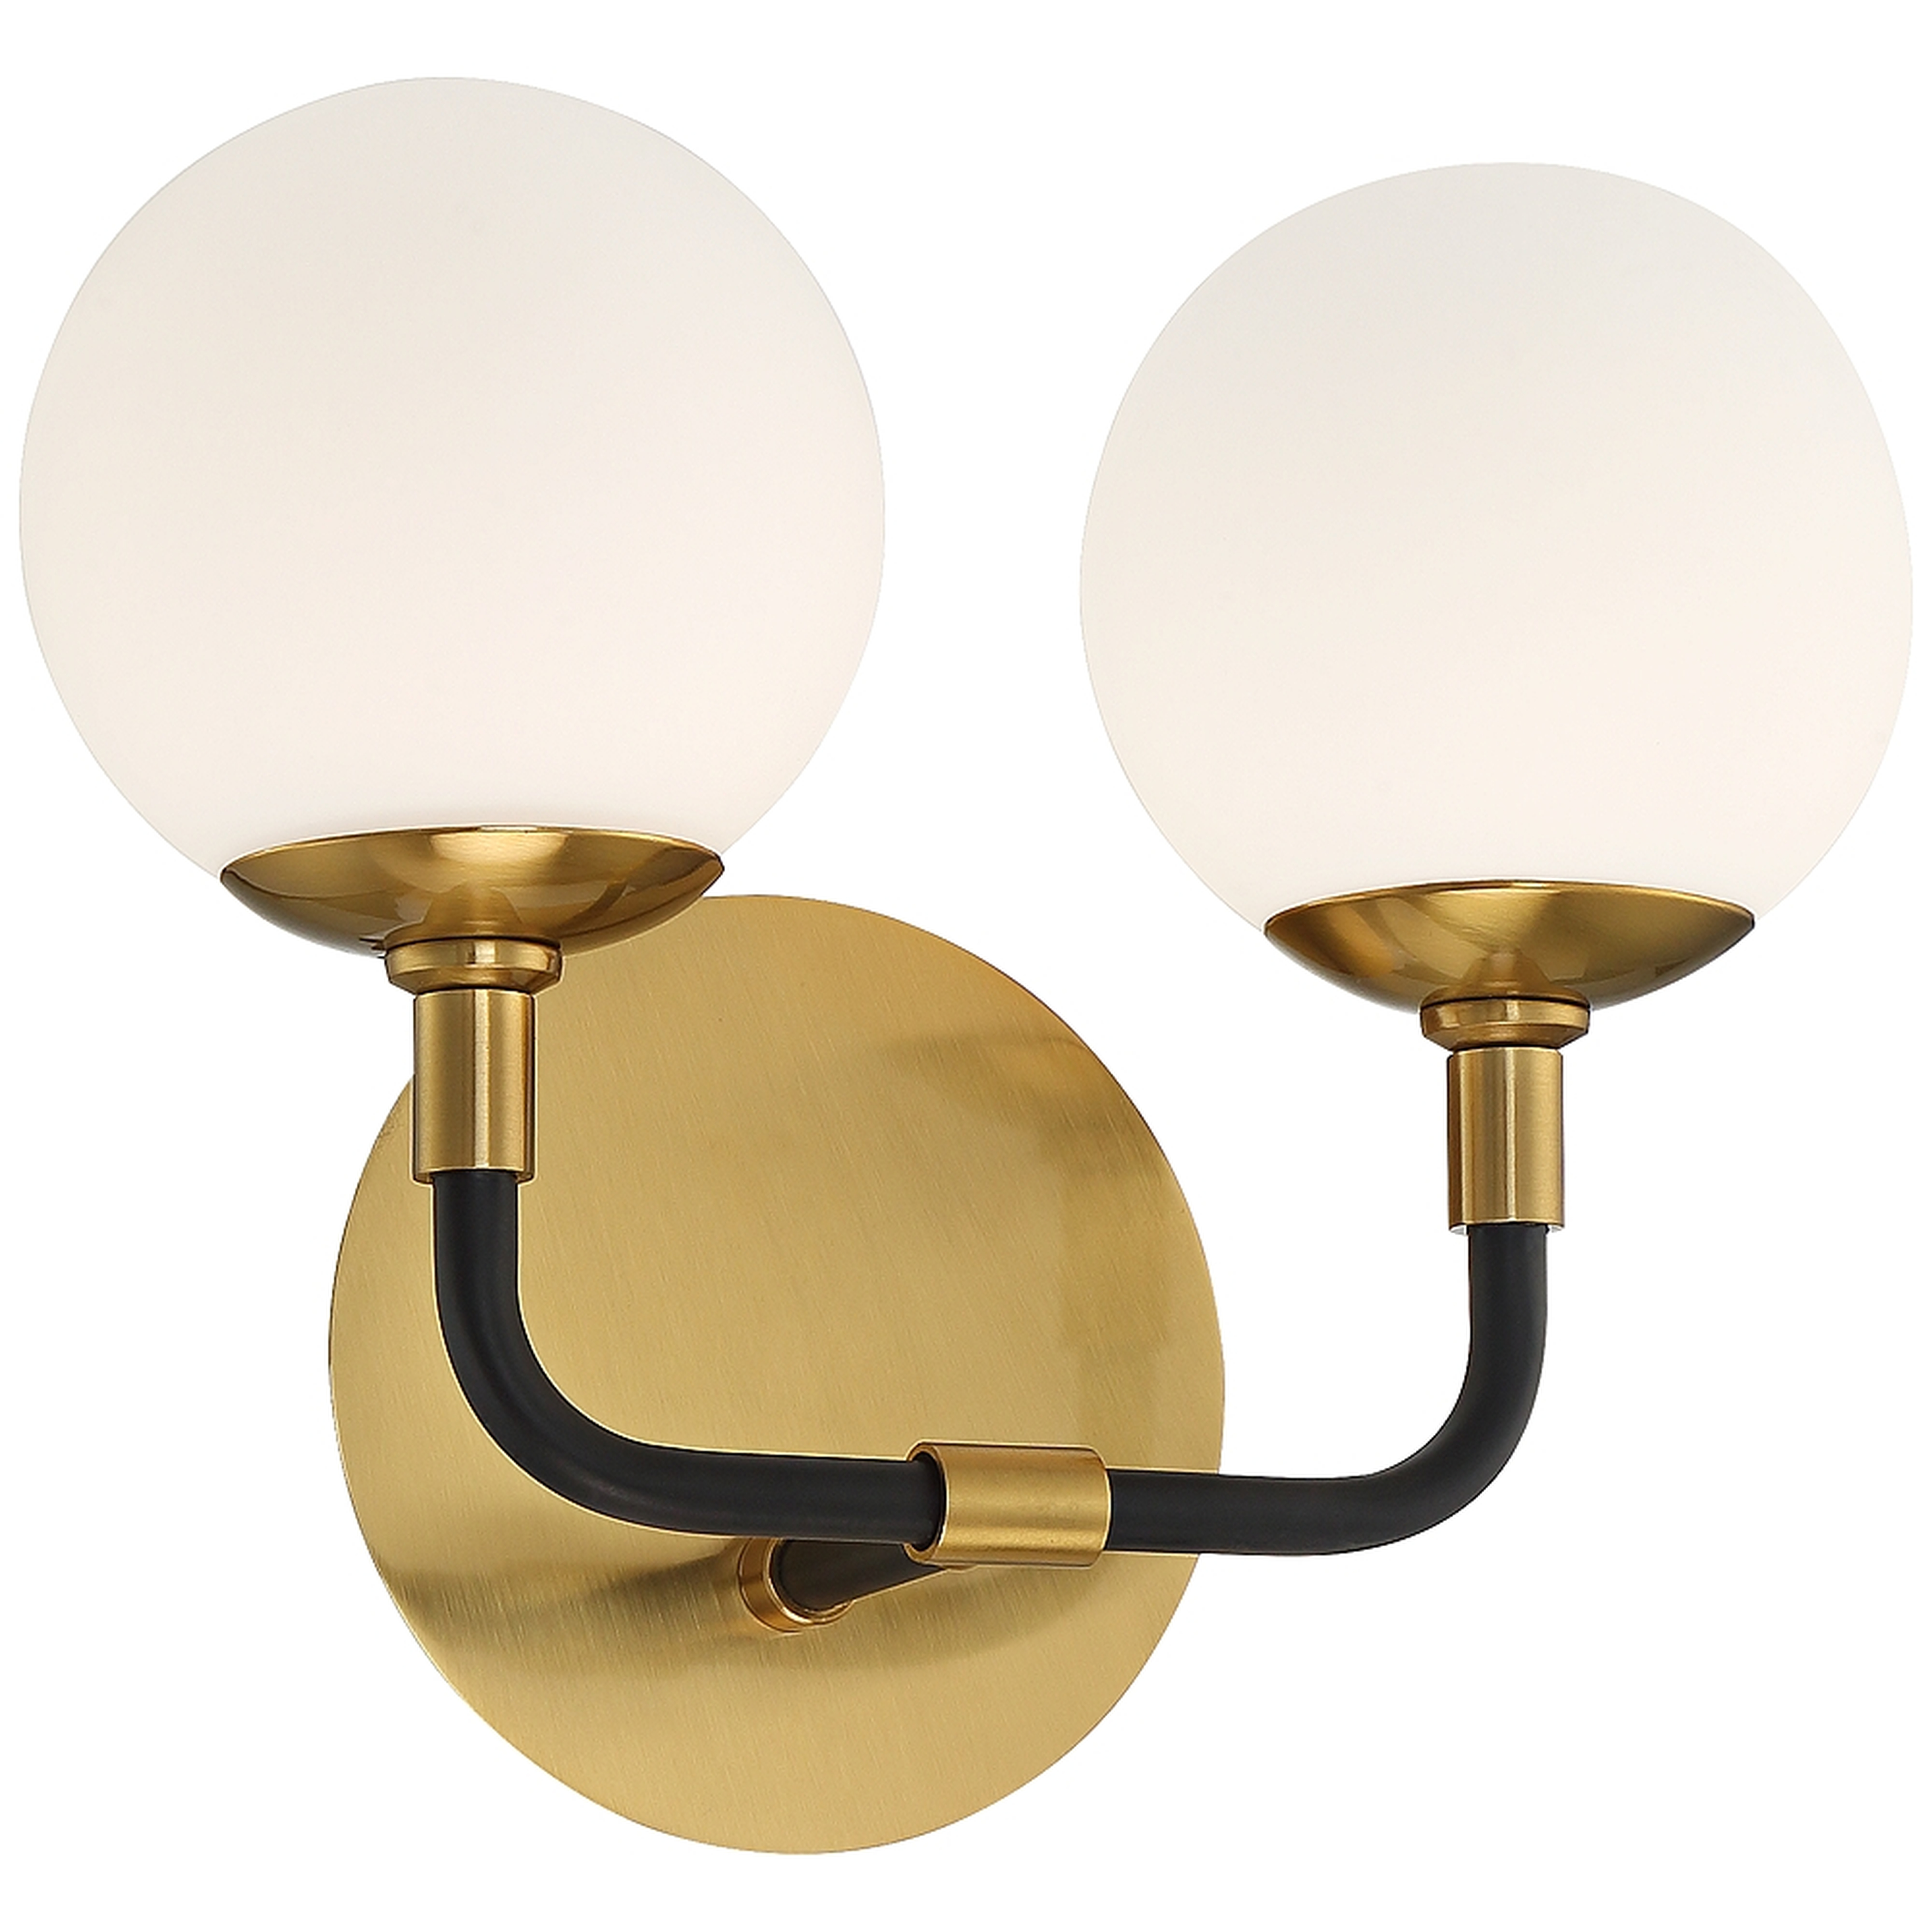 Possini Euro Mylie 6 3/4" High Brass and Black Wall Sconce - Style # 70T79 - Lamps Plus